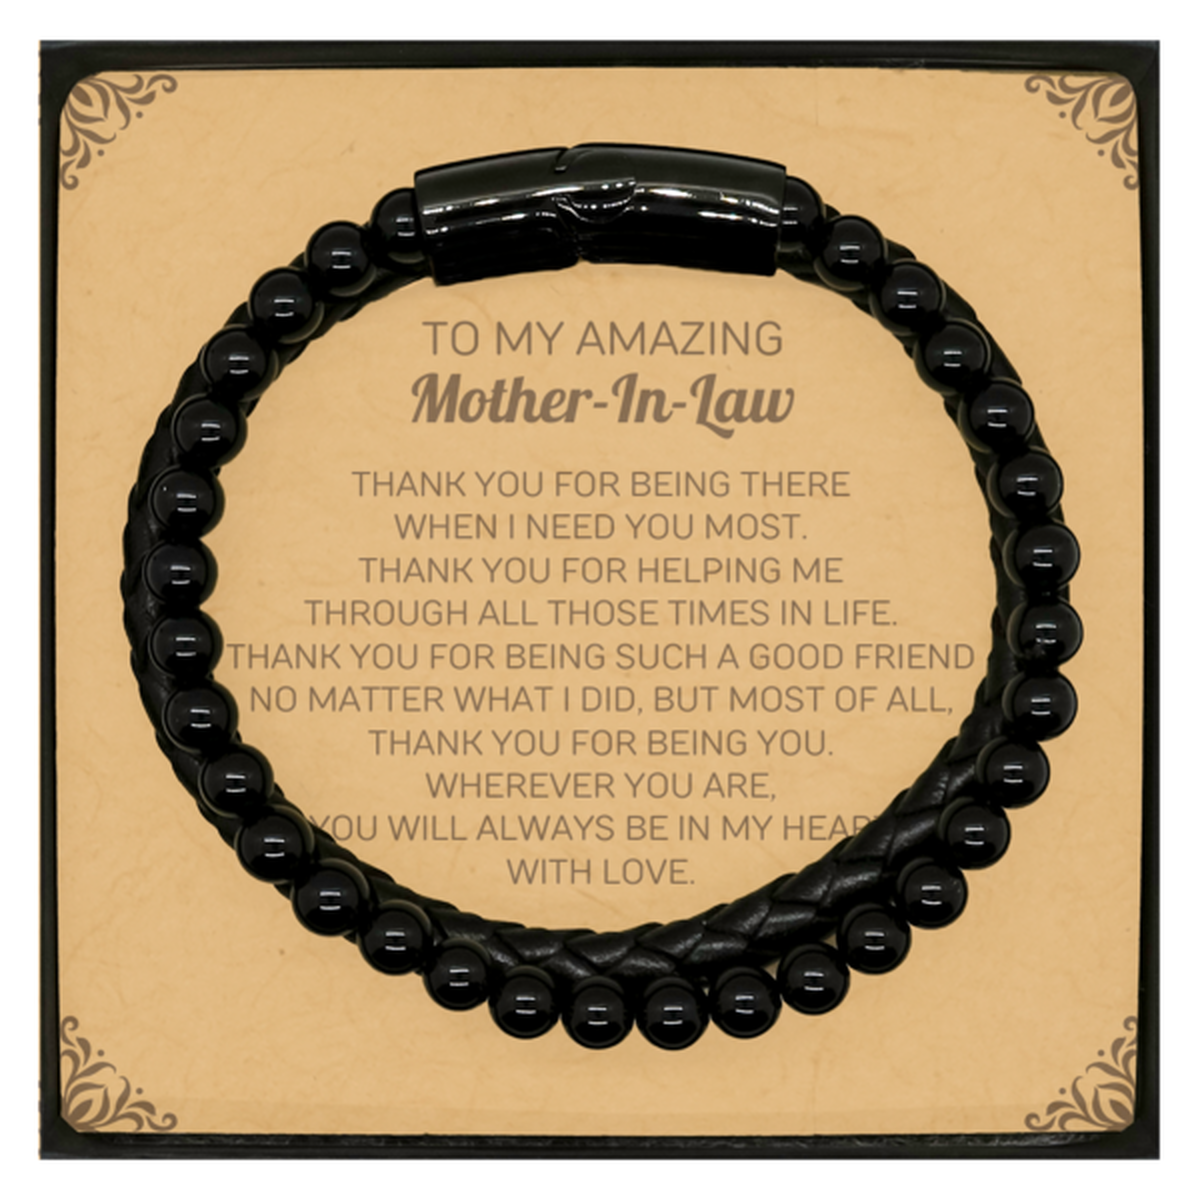 To My Amazing Mother-In-Law Stone Leather Bracelets, Thank you for being there, Thank You Gifts For Mother-In-Law, Birthday, Christmas Unique Gifts For Mother-In-Law